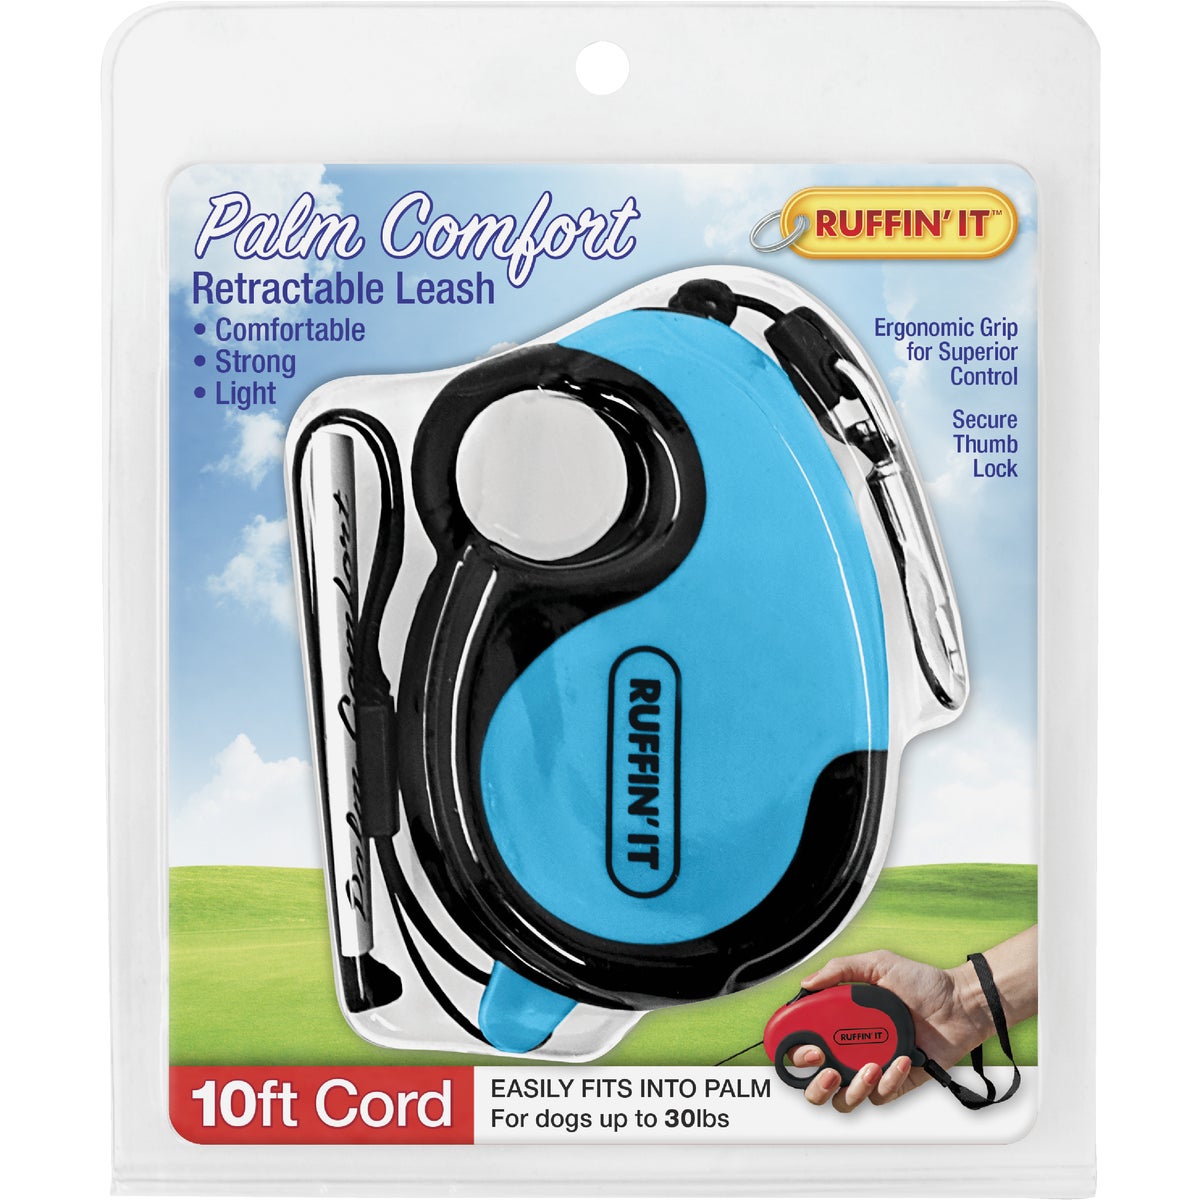 Westminster Pet Ruffin' it Palm Comfort 10 Ft. Cord Up to 30 Lb. Dog Retractable Leash